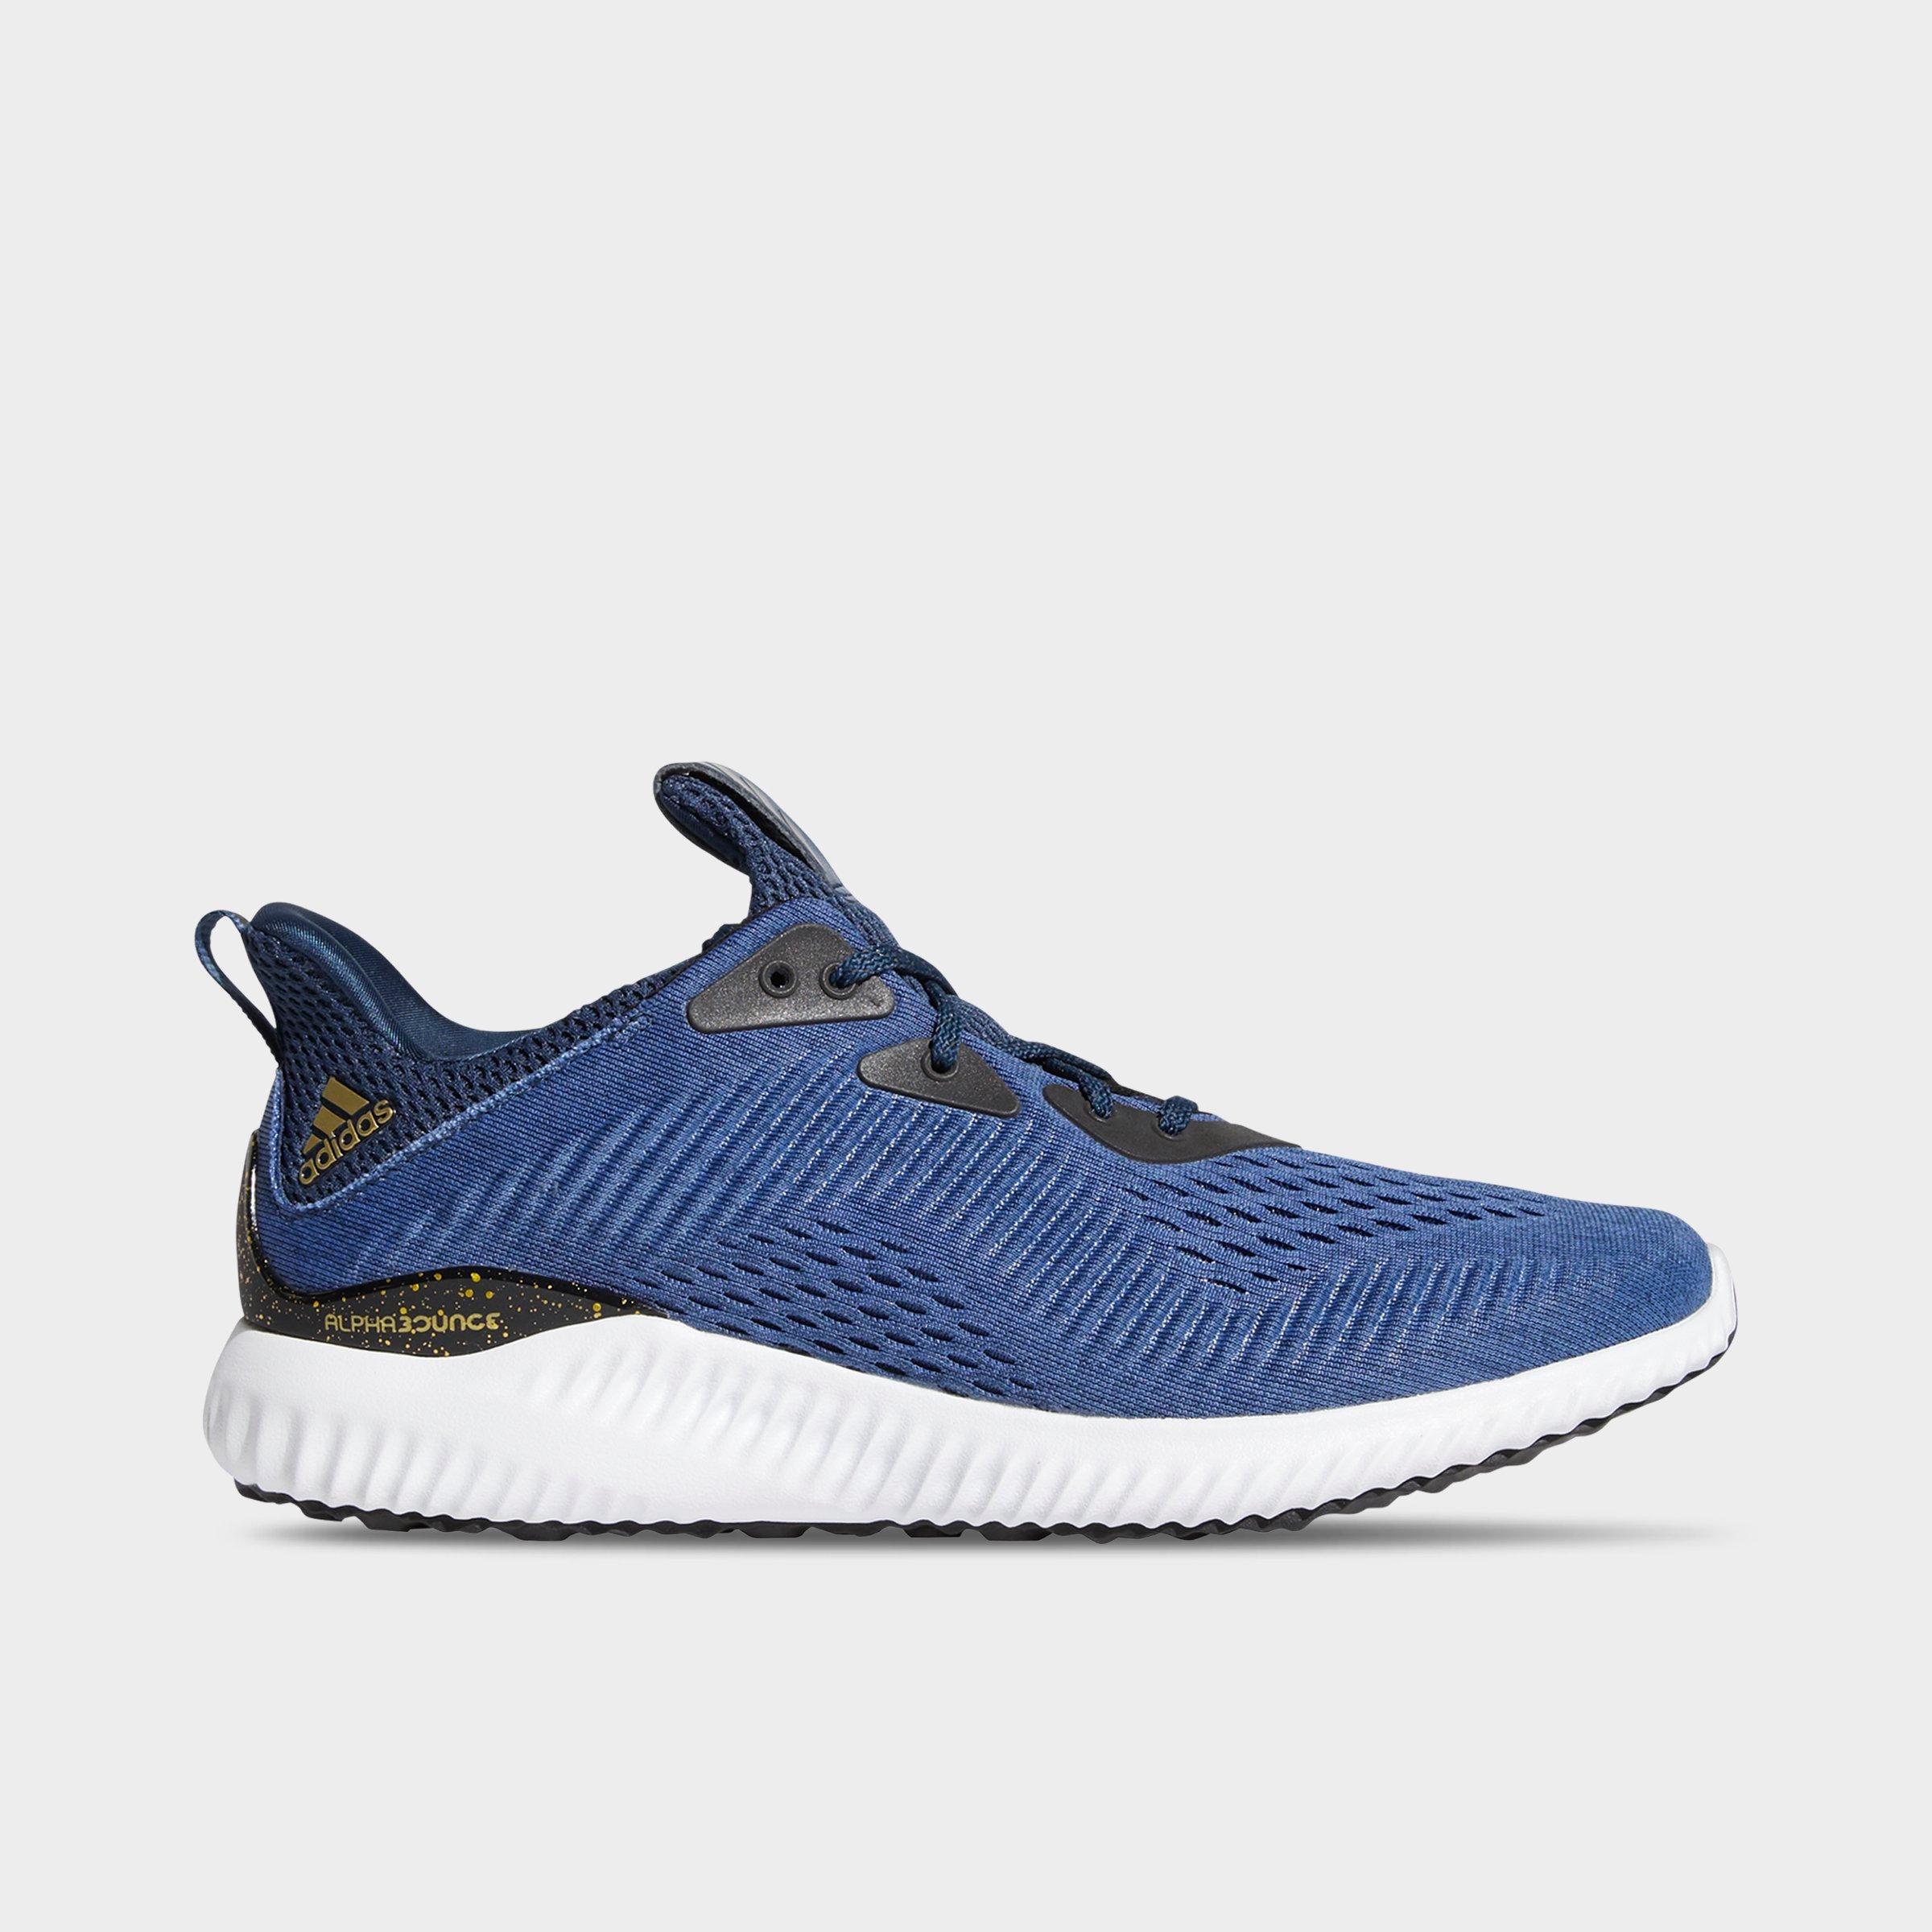 adidas alphabounce navy running shoes